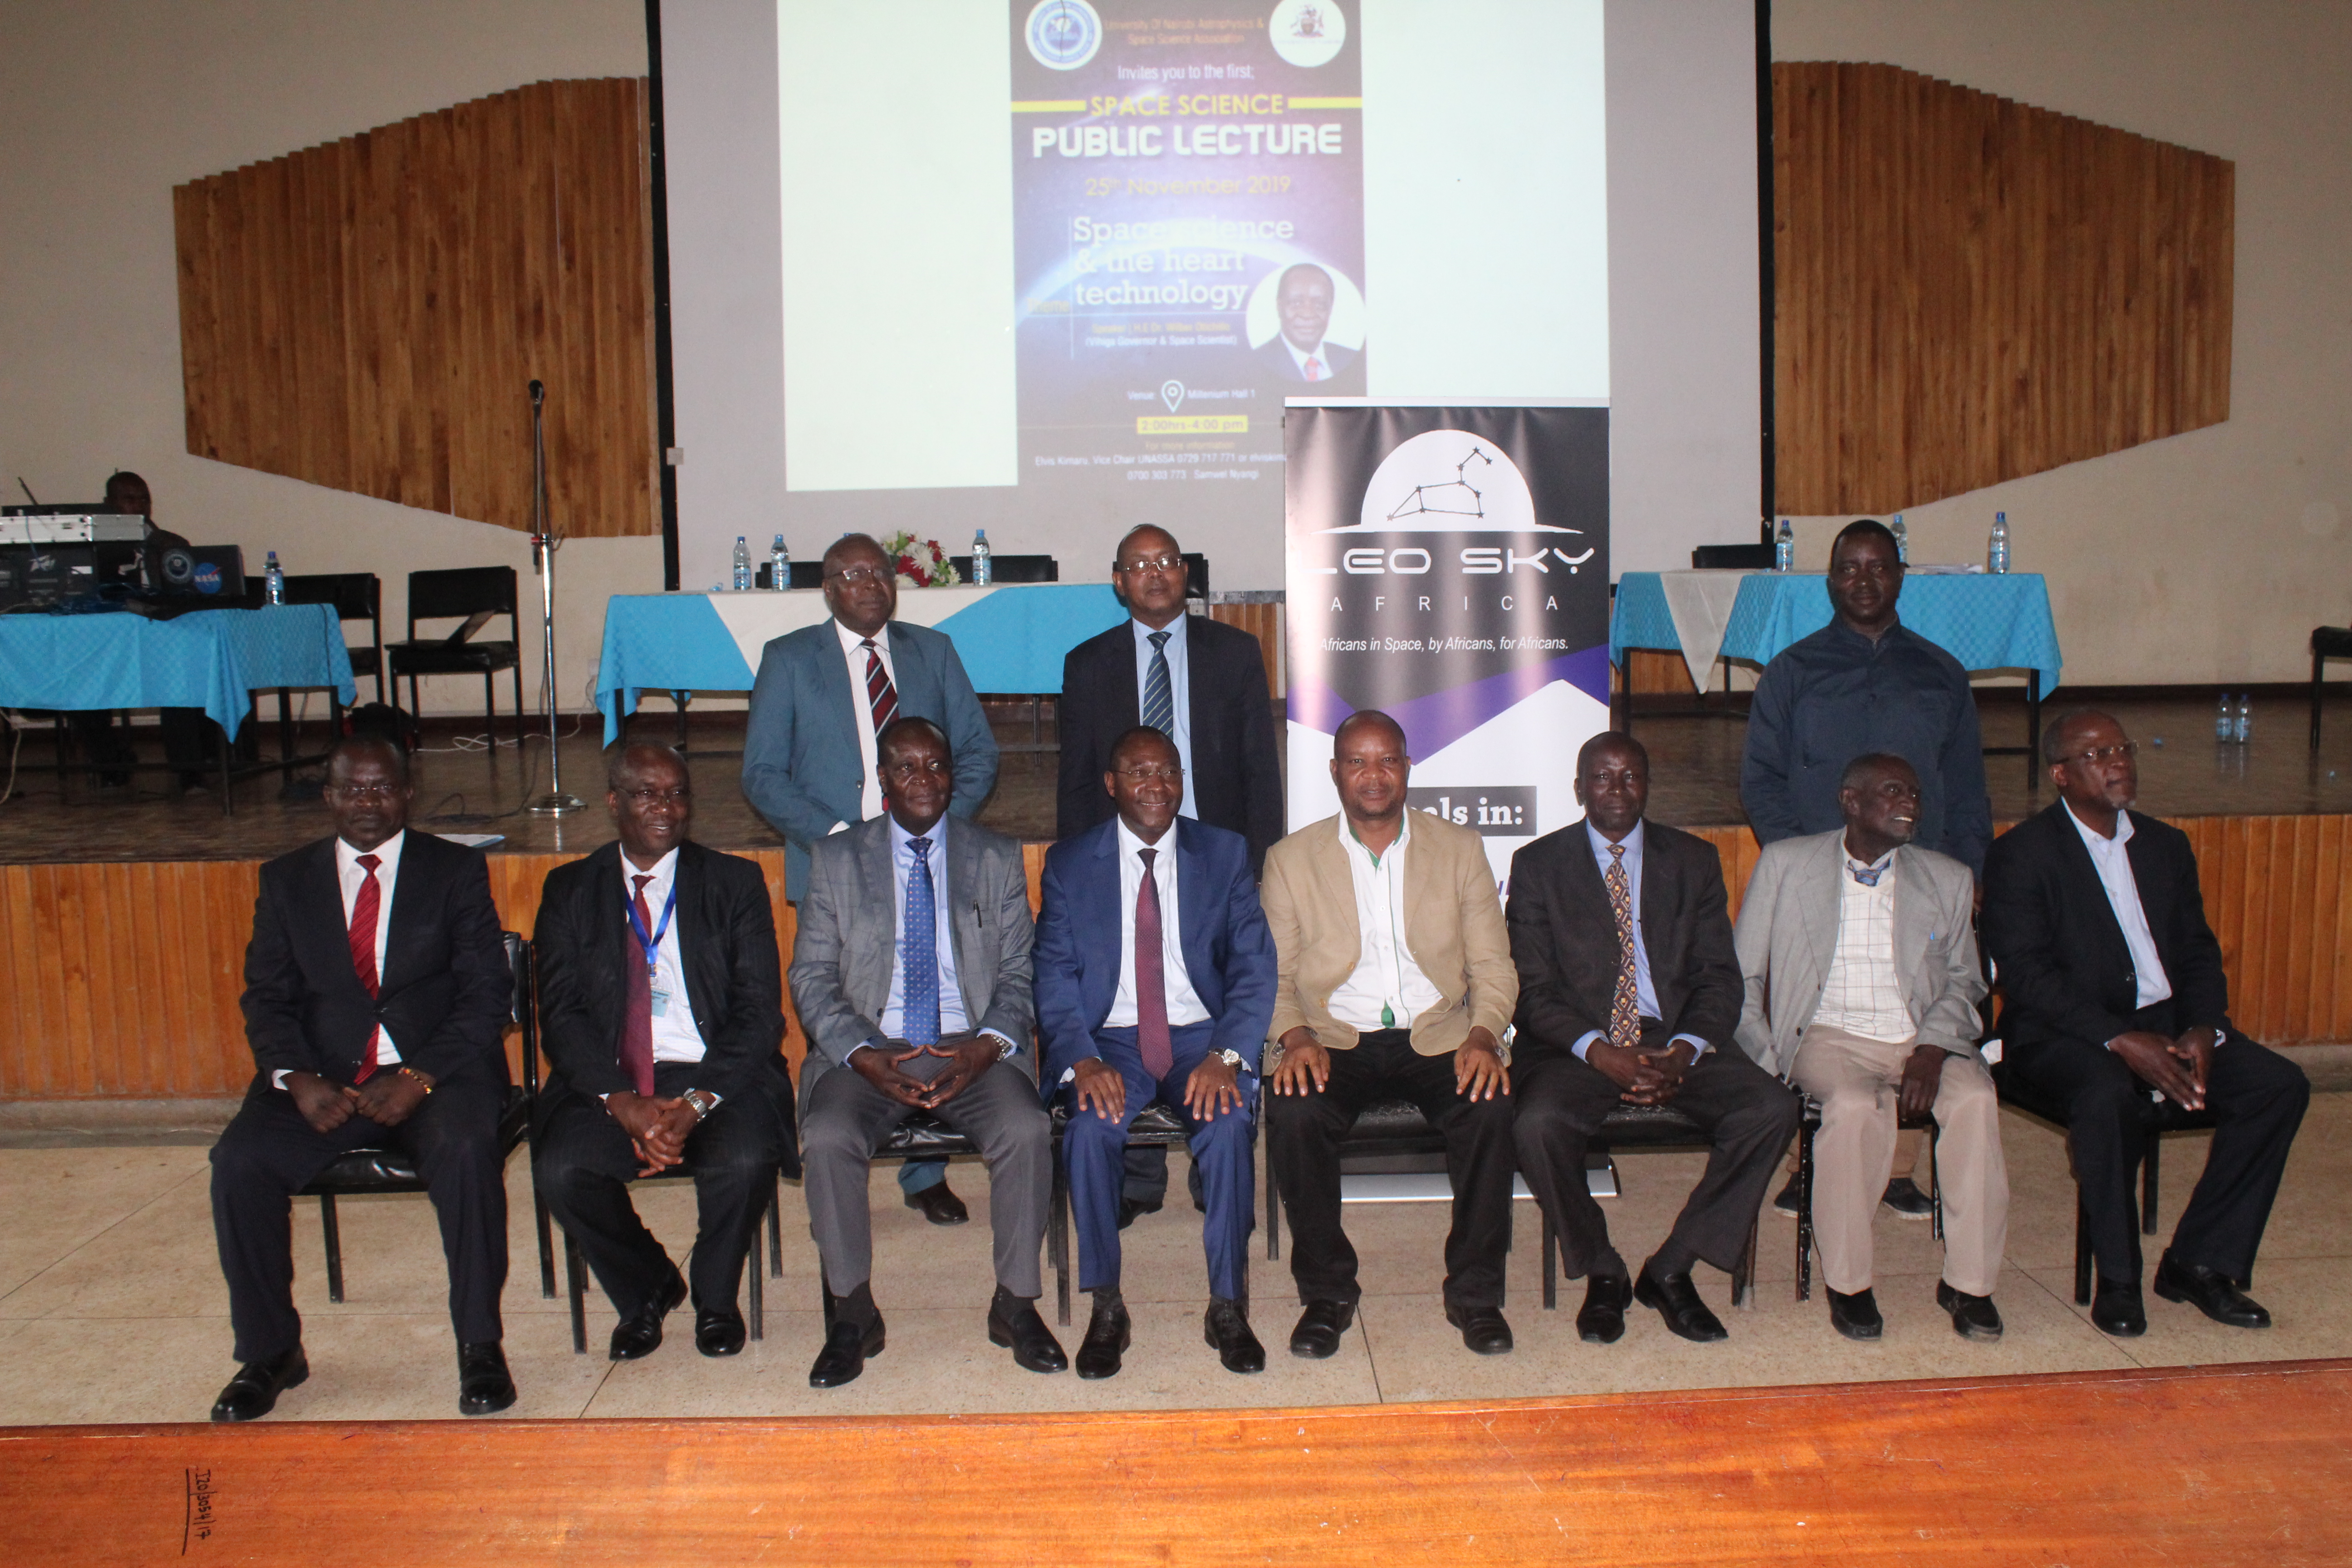 Hon Wilber Ottichilo with guests and CBPS administration after giving a public lecture on Space Science